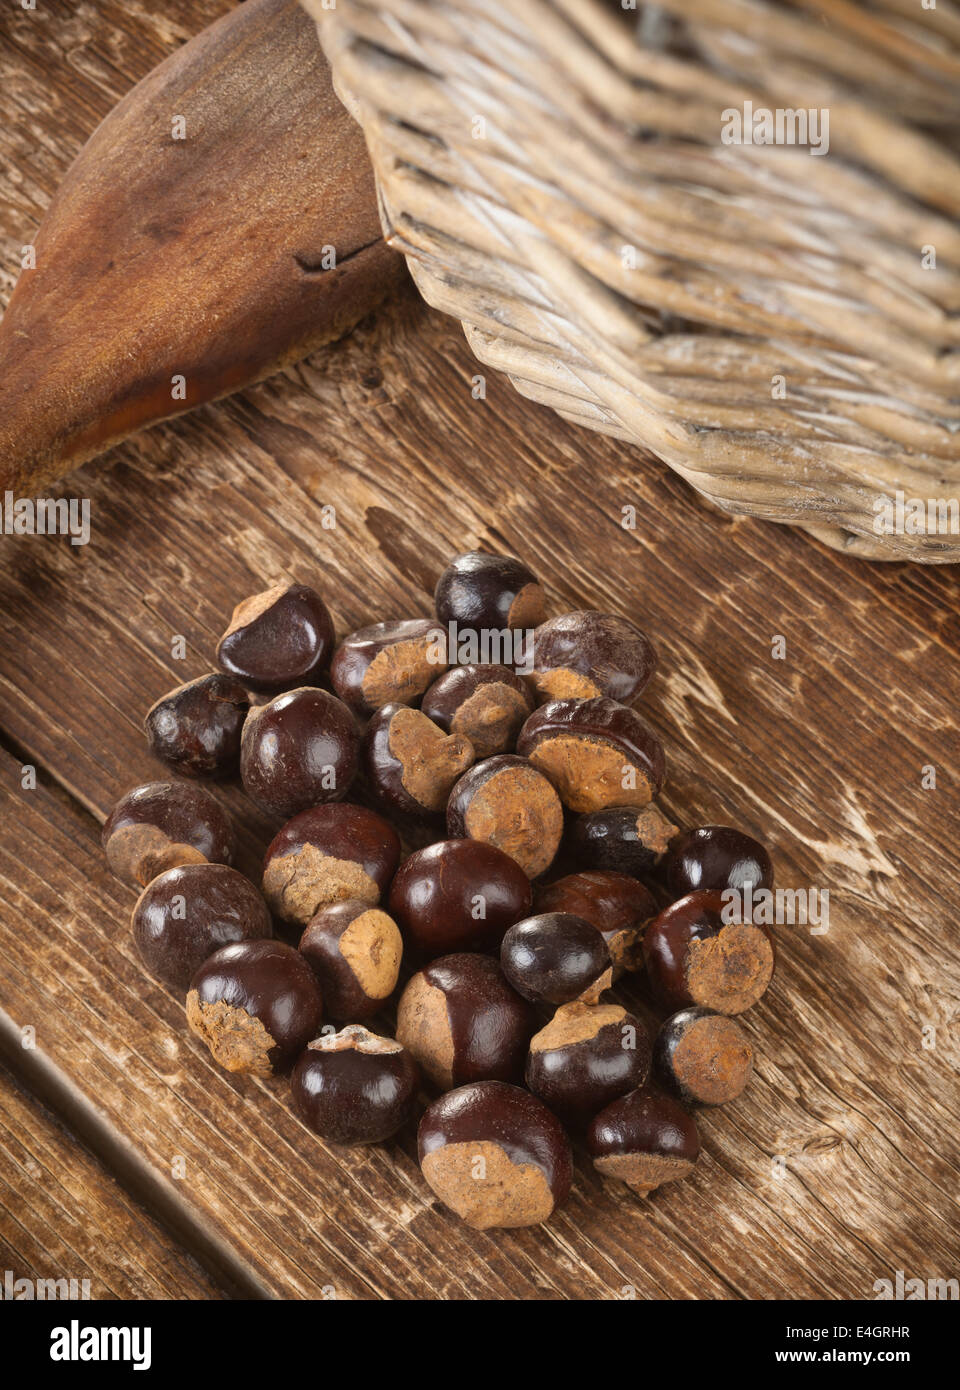 Guarana seeds on wooden table photographed with studio lighting Stock Photo